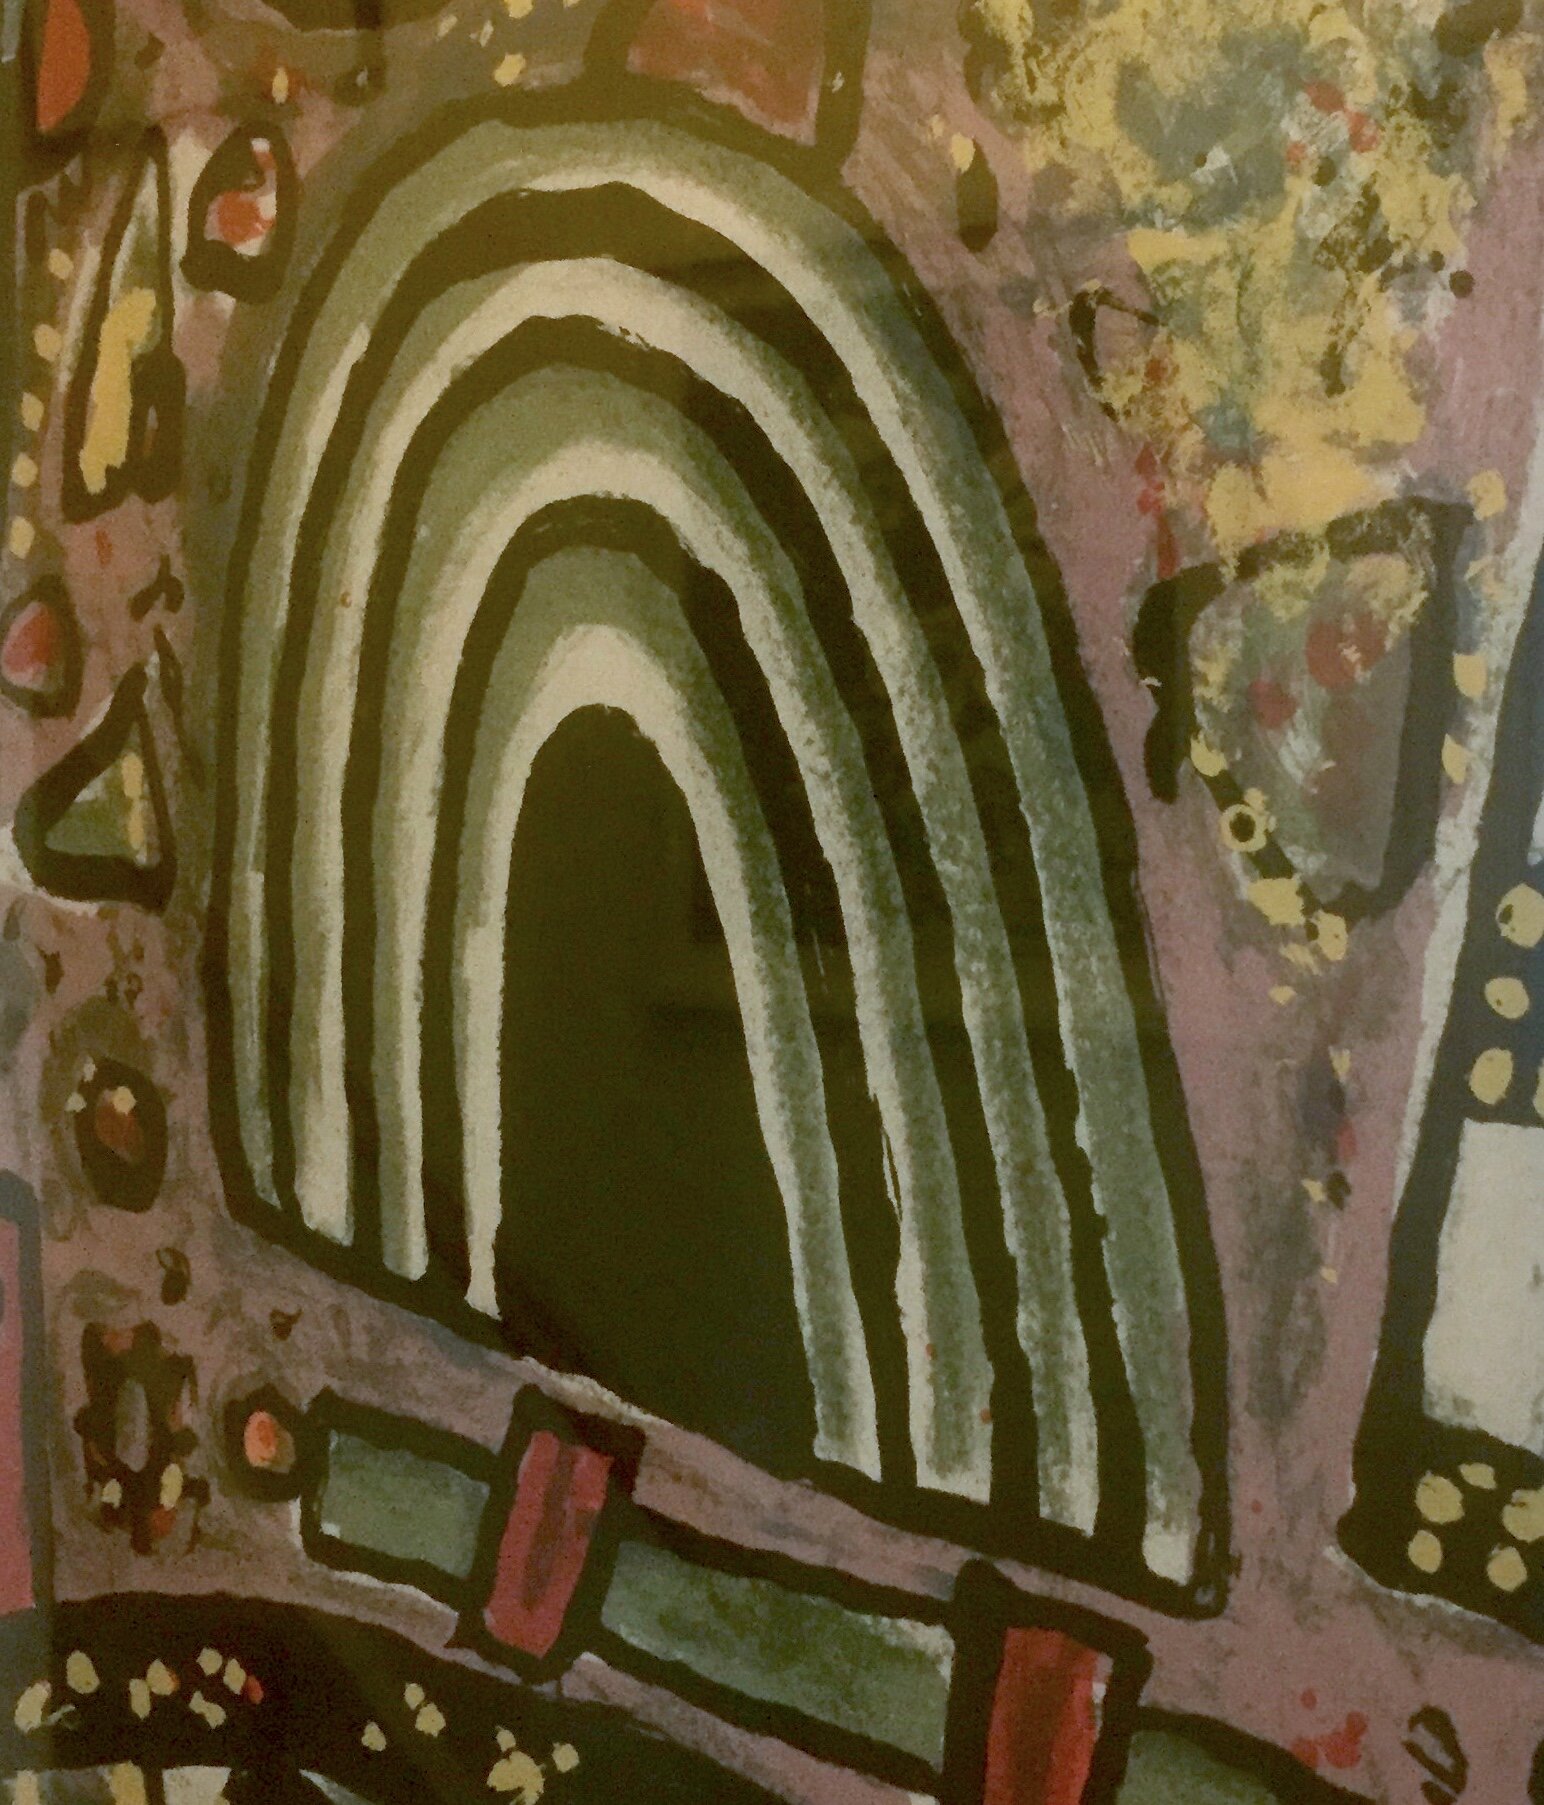 'Energy is Delight' (detail), 2001